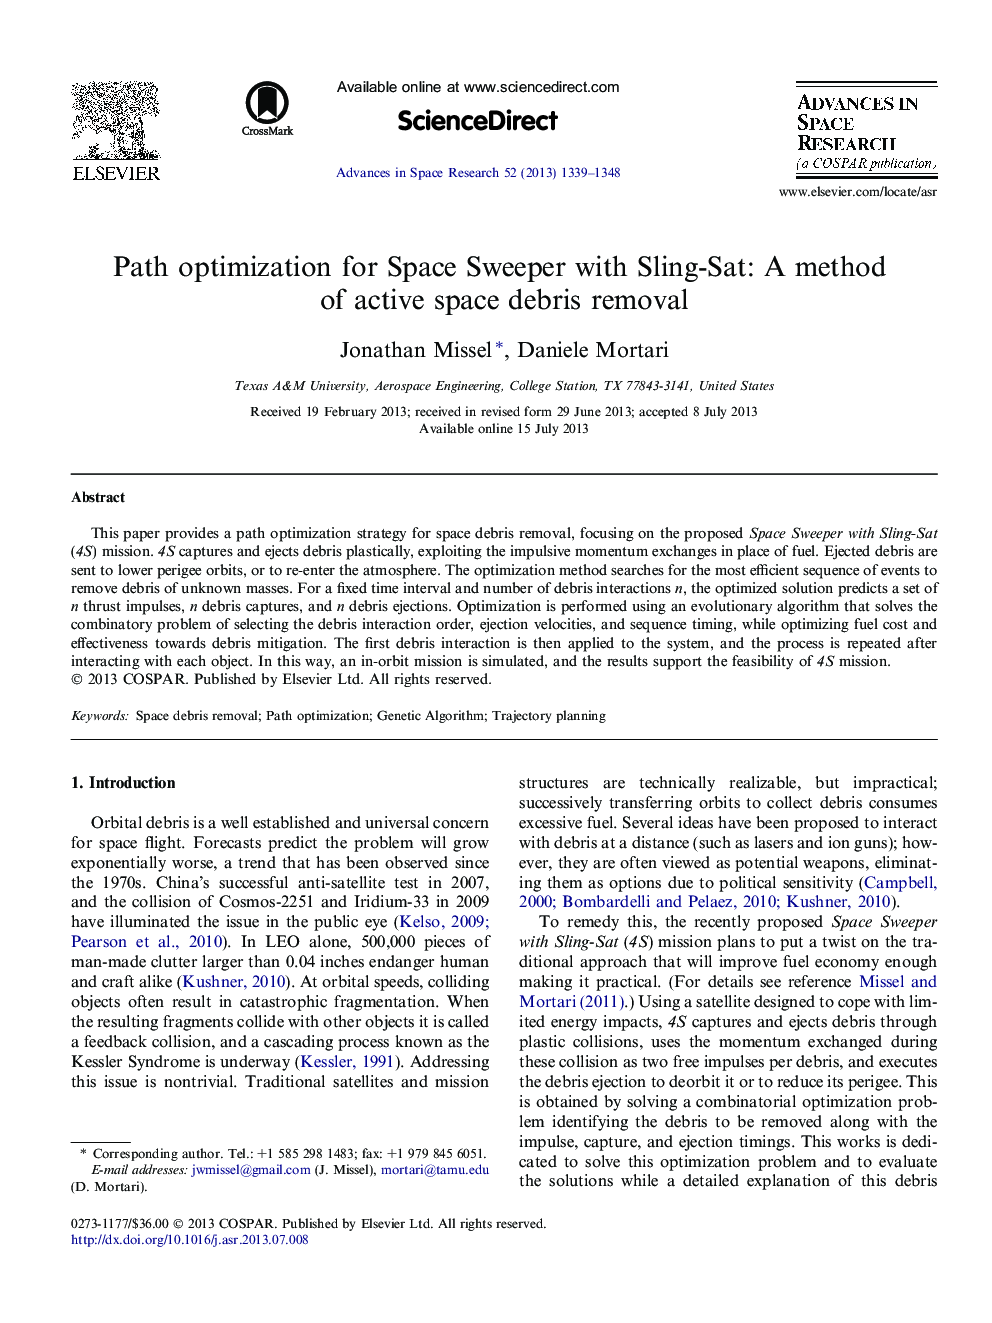 Path optimization for Space Sweeper with Sling-Sat: A method of active space debris removal